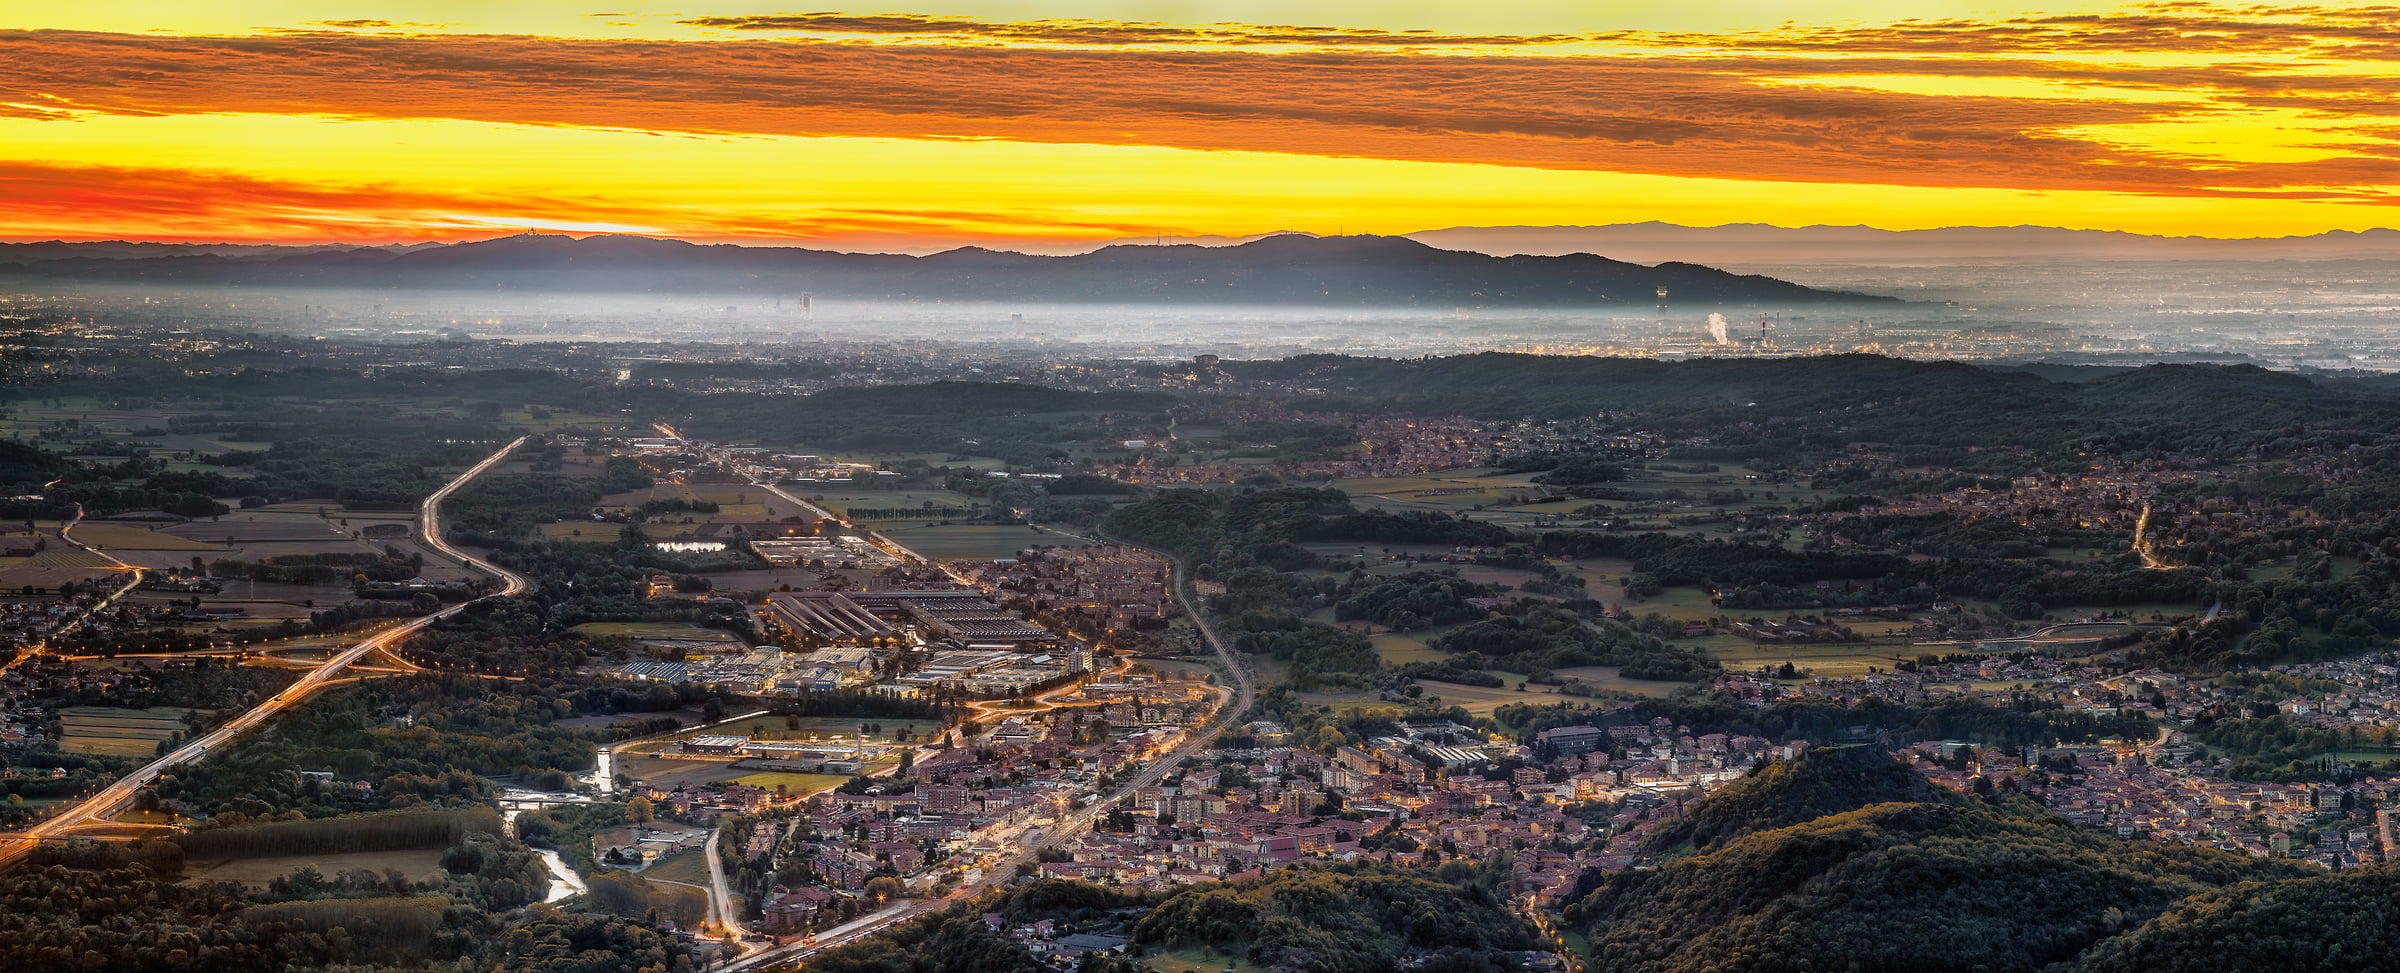 480 megapixels! A very high resolution, large-format VAST photo print of Turin, Italy at sunset; photograph created by Duilio Fiorille in Punta Ancoccia, Sant'Ambrogio, Piedmont, Italy.